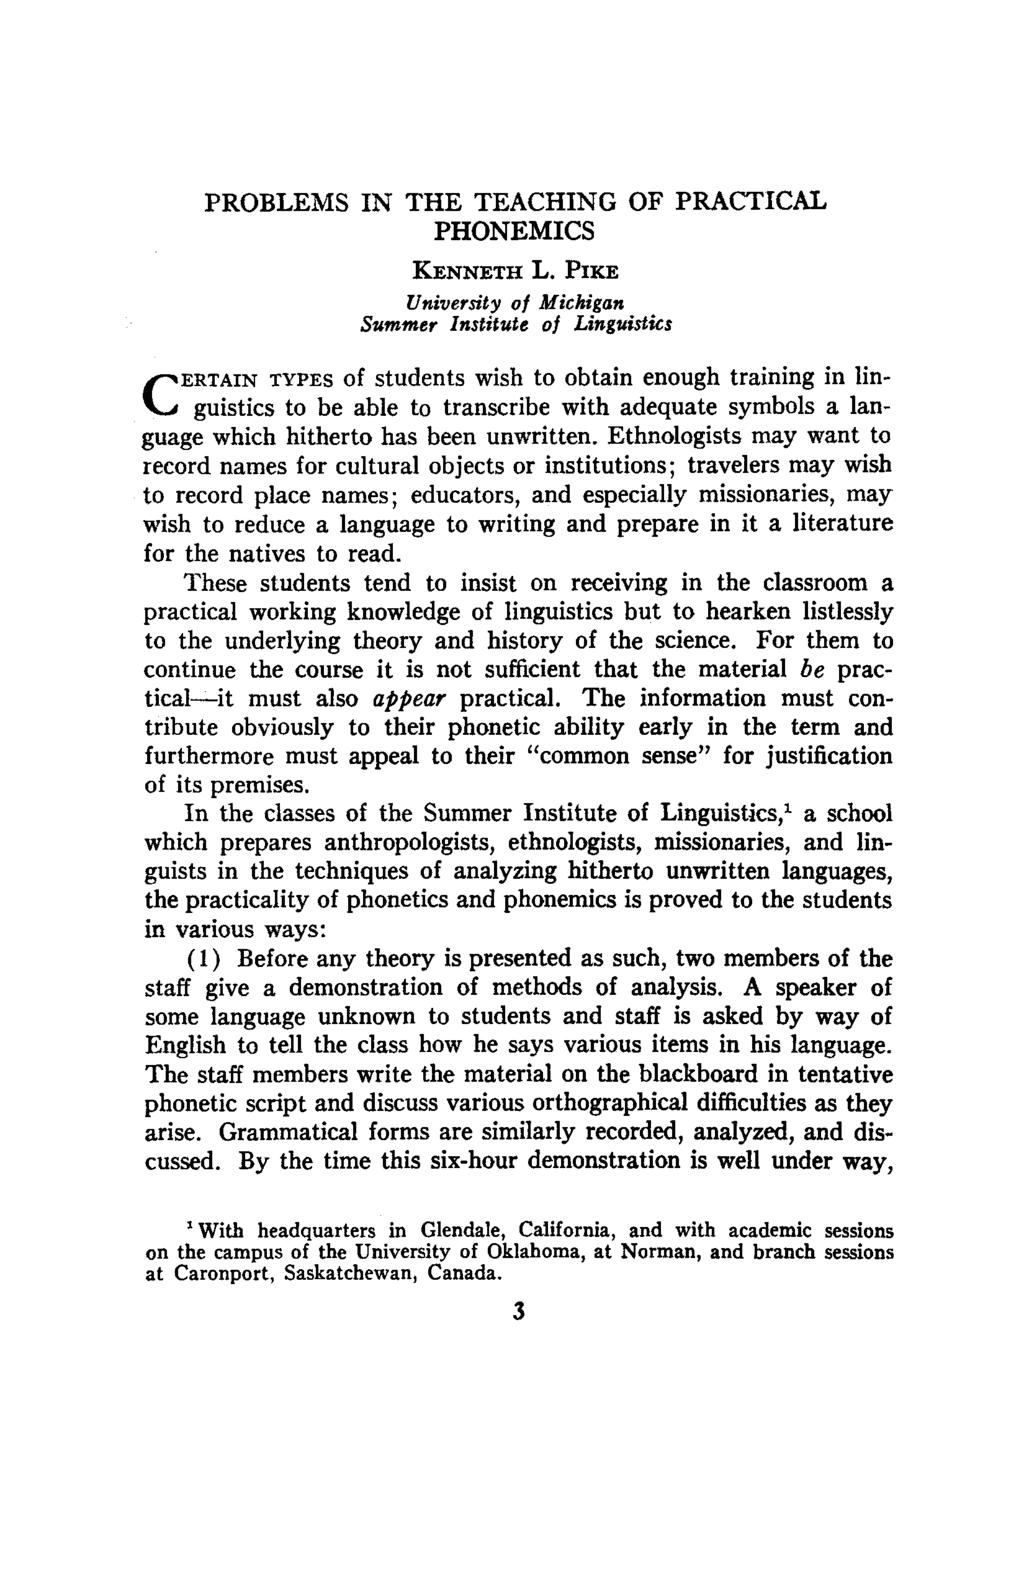 PROBLEMS IN THE TEACHING OF PRACTICAL PHONEMICS KENNETH L.